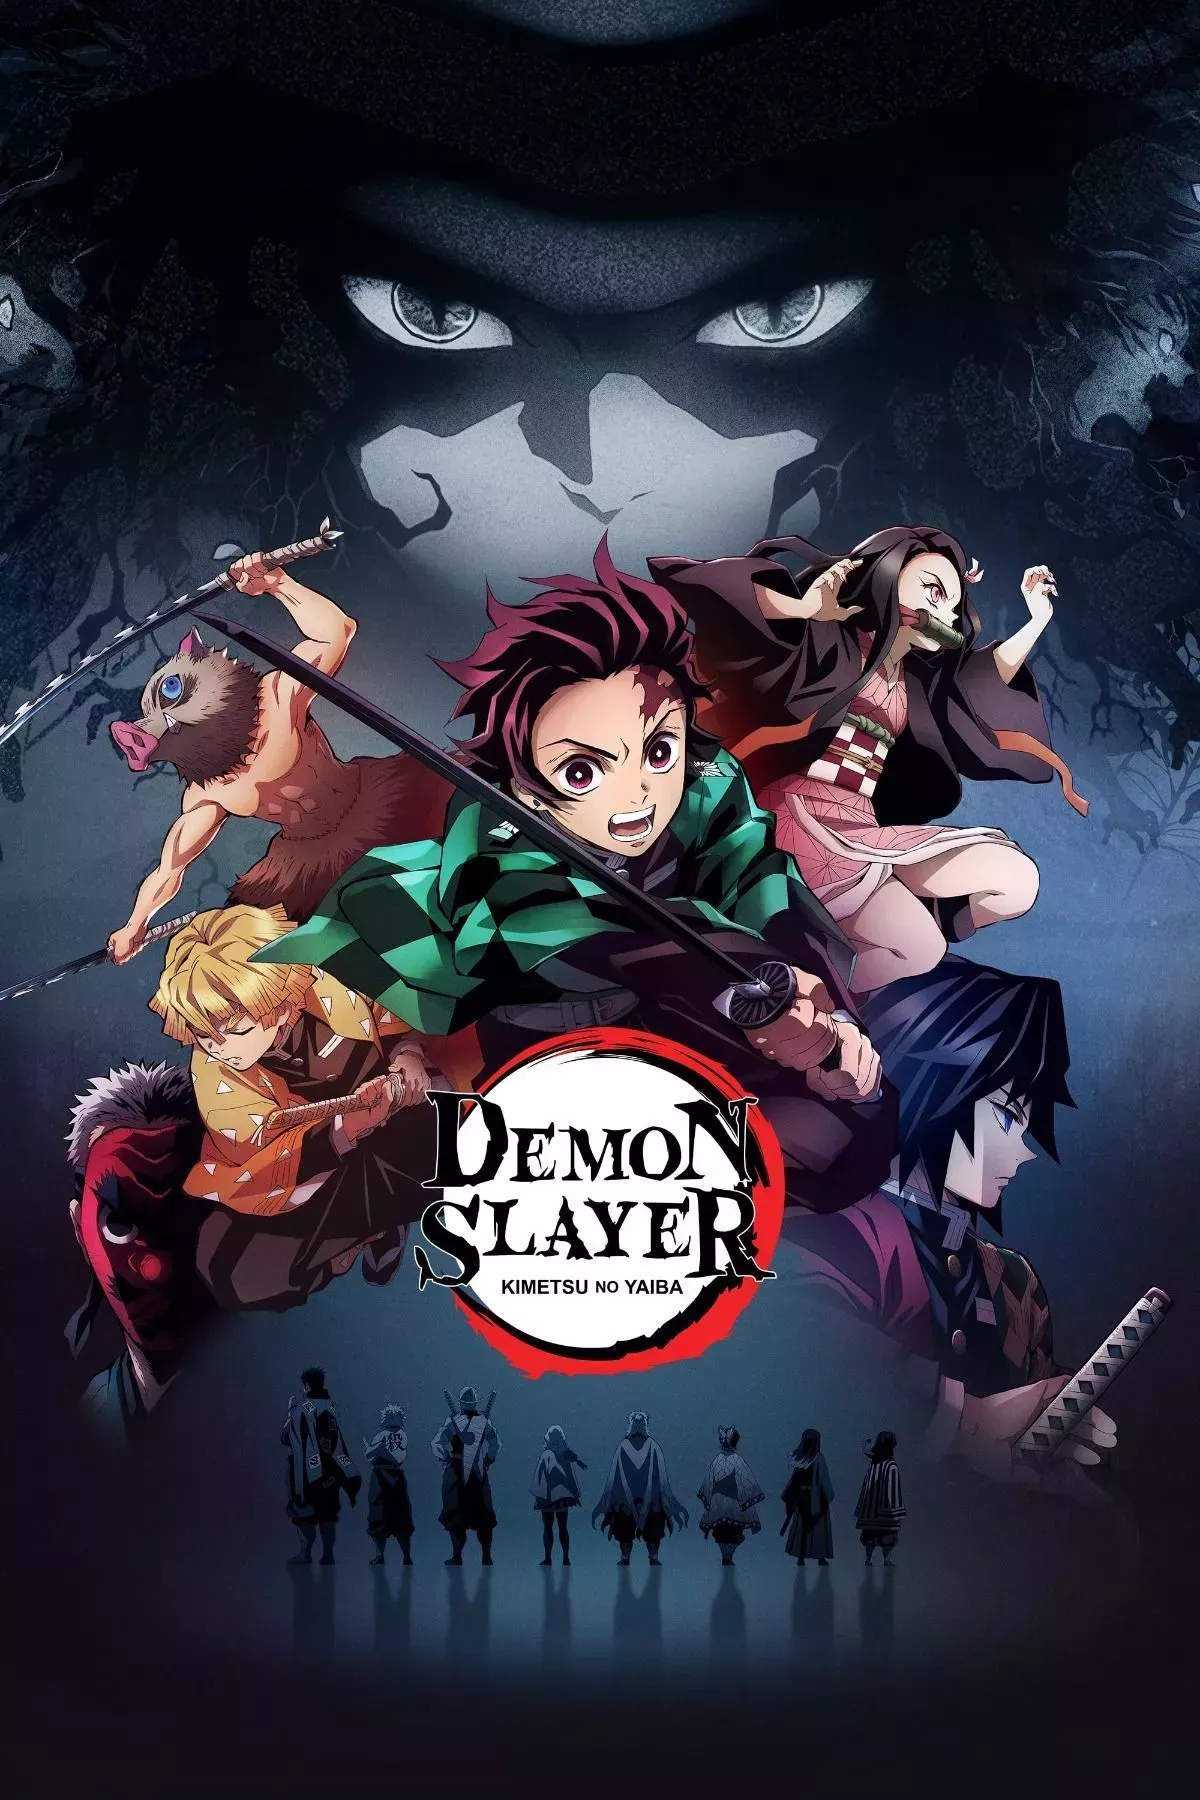 Tanjiro and the rest of the characters leaping into battle in the Demon Slayer Anime Poster